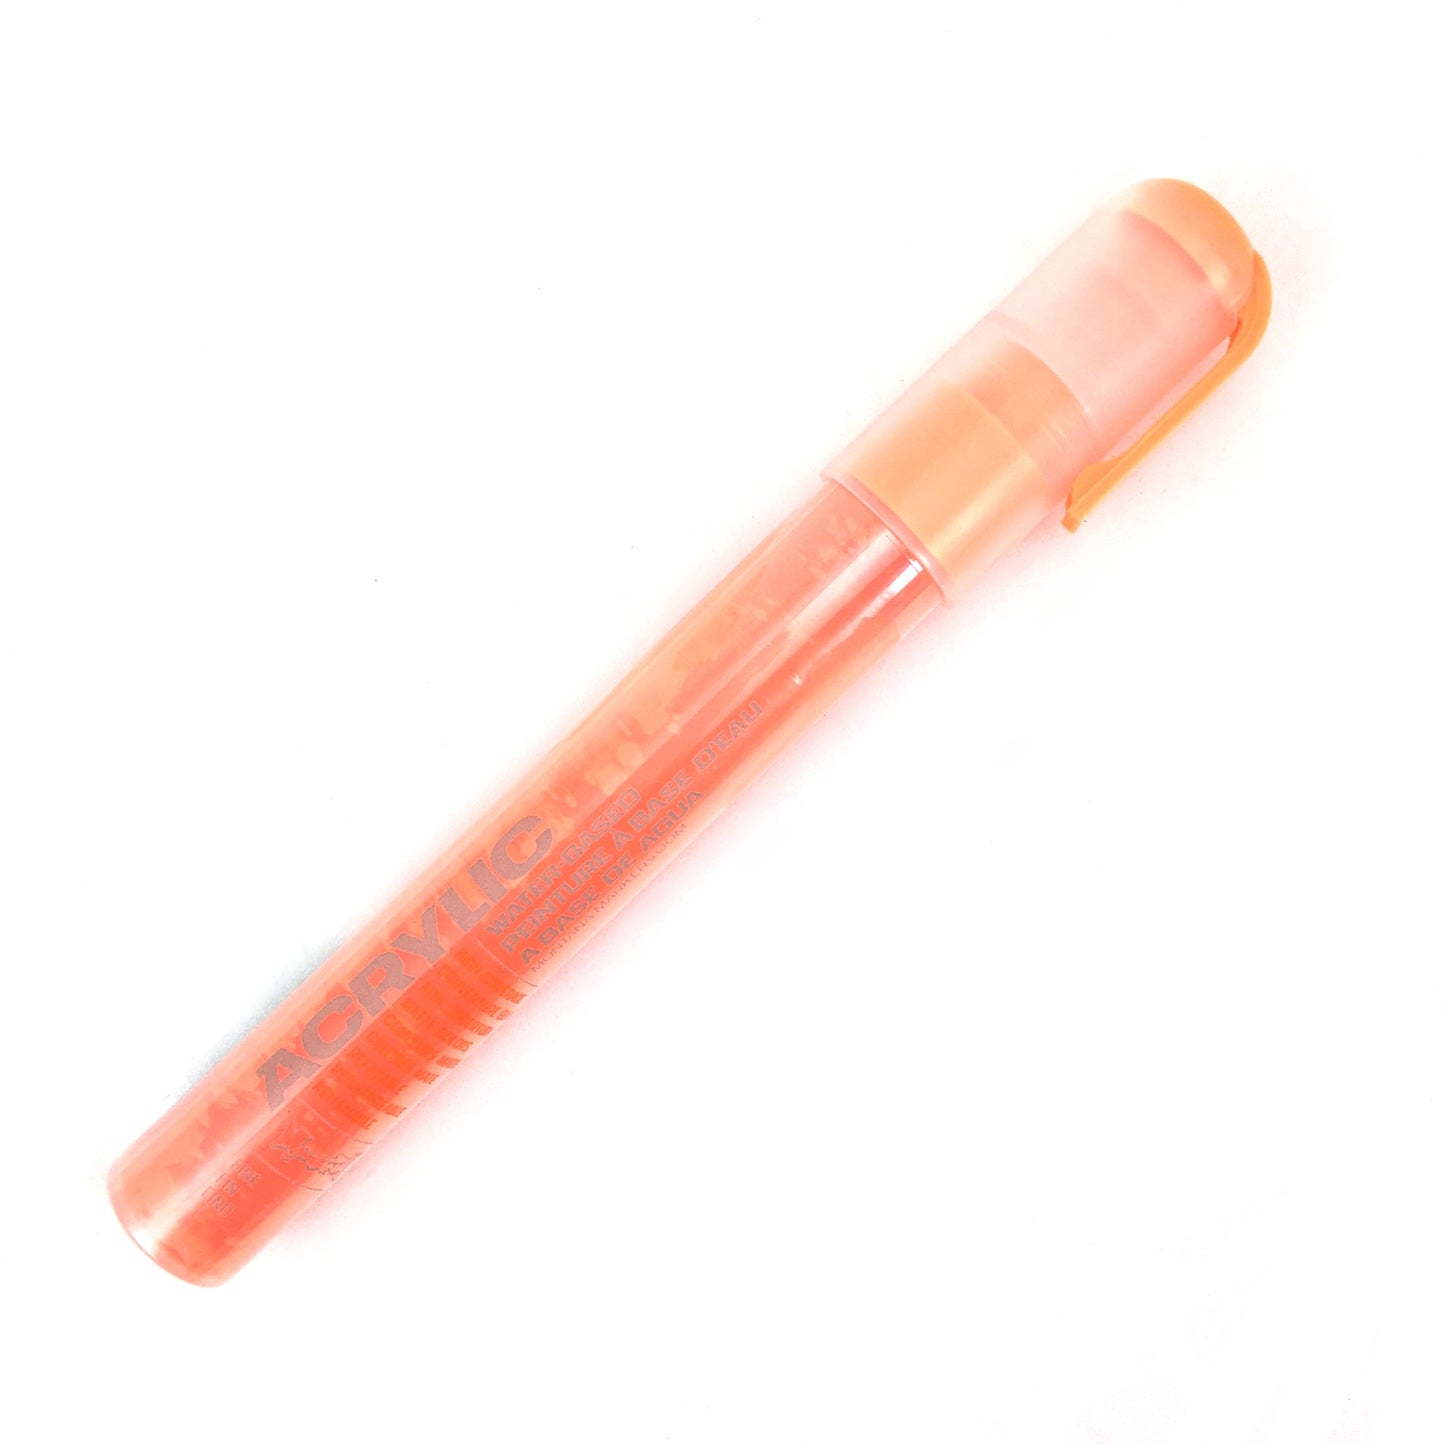 Montana Acrylic Paint Markers - Individuals - Power Orange / 2 mm by Montana - K. A. Artist Shop